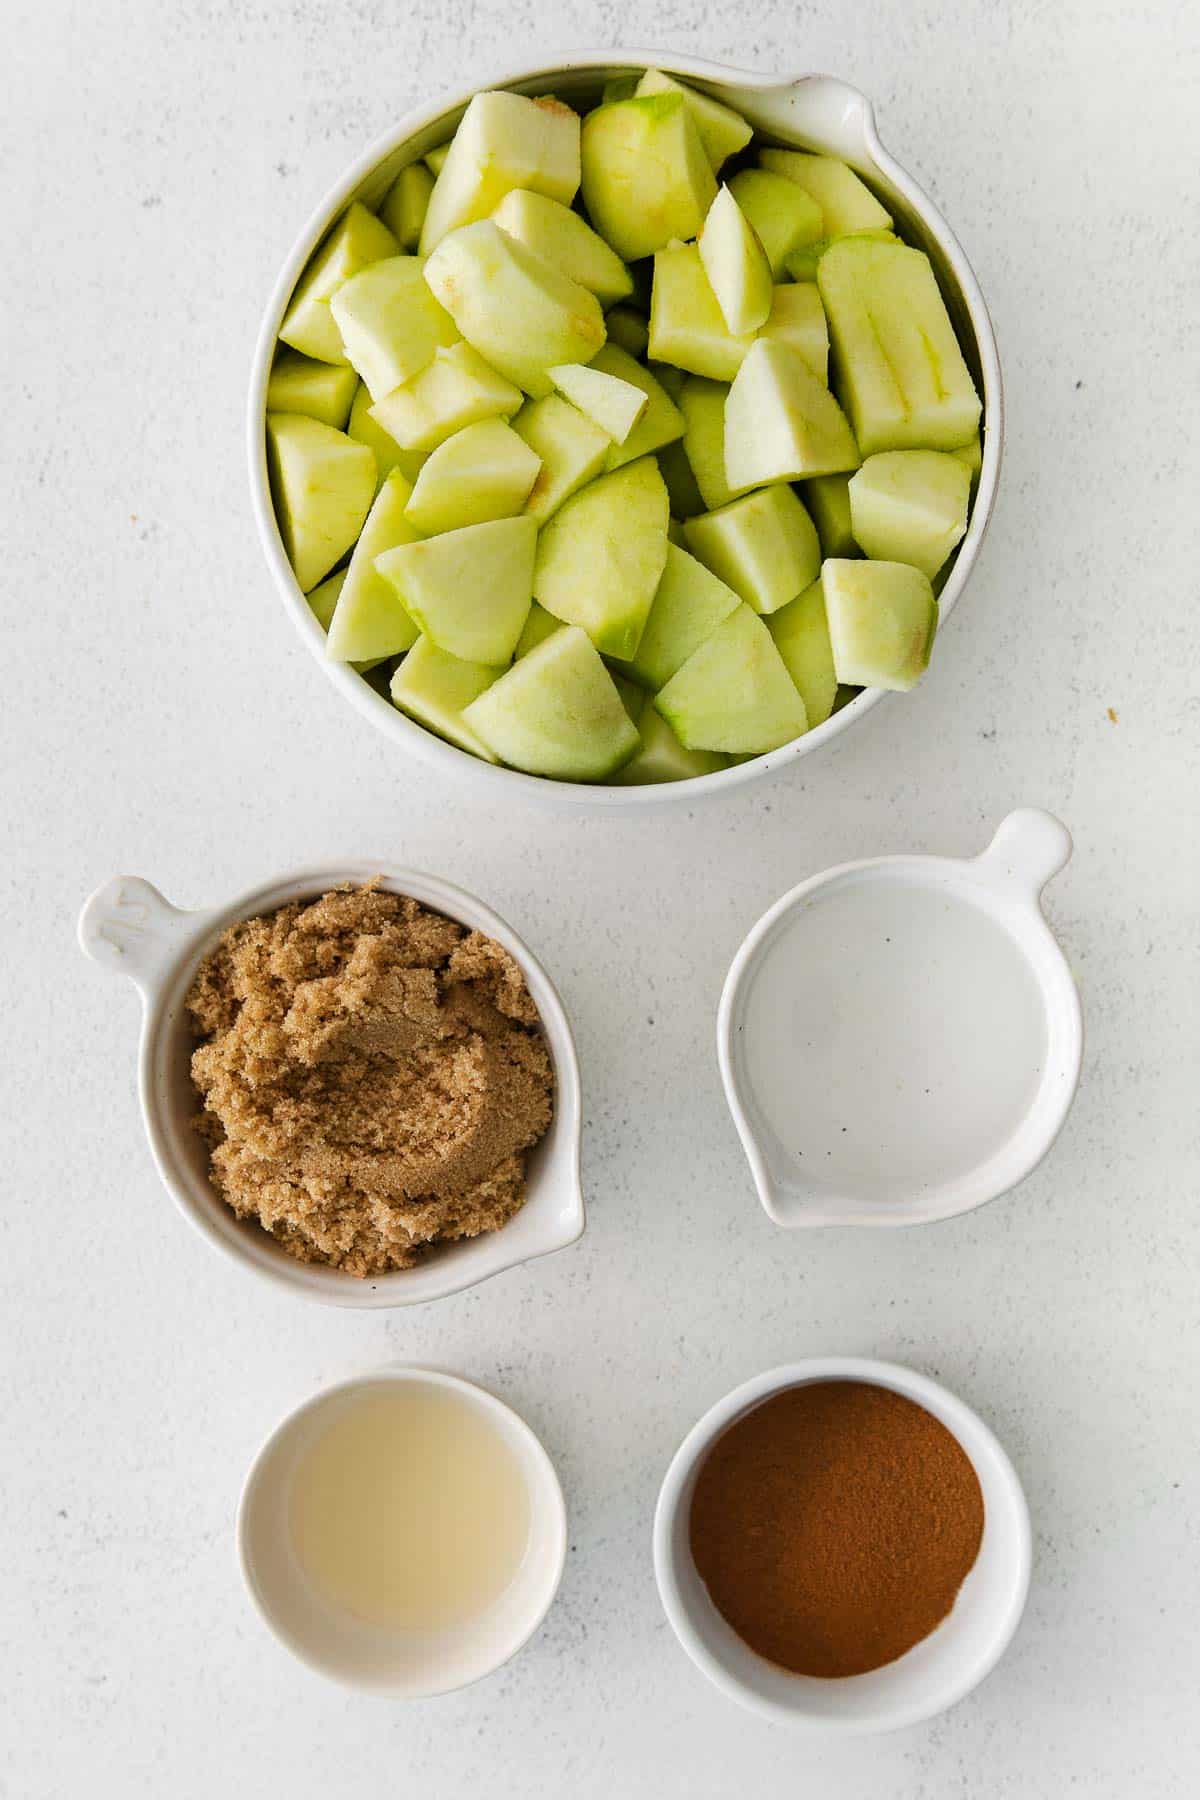 several white bowls with ingredients for apple butter - diced granny smith apples, brown sugar, cinnamon, lemon juice and water.